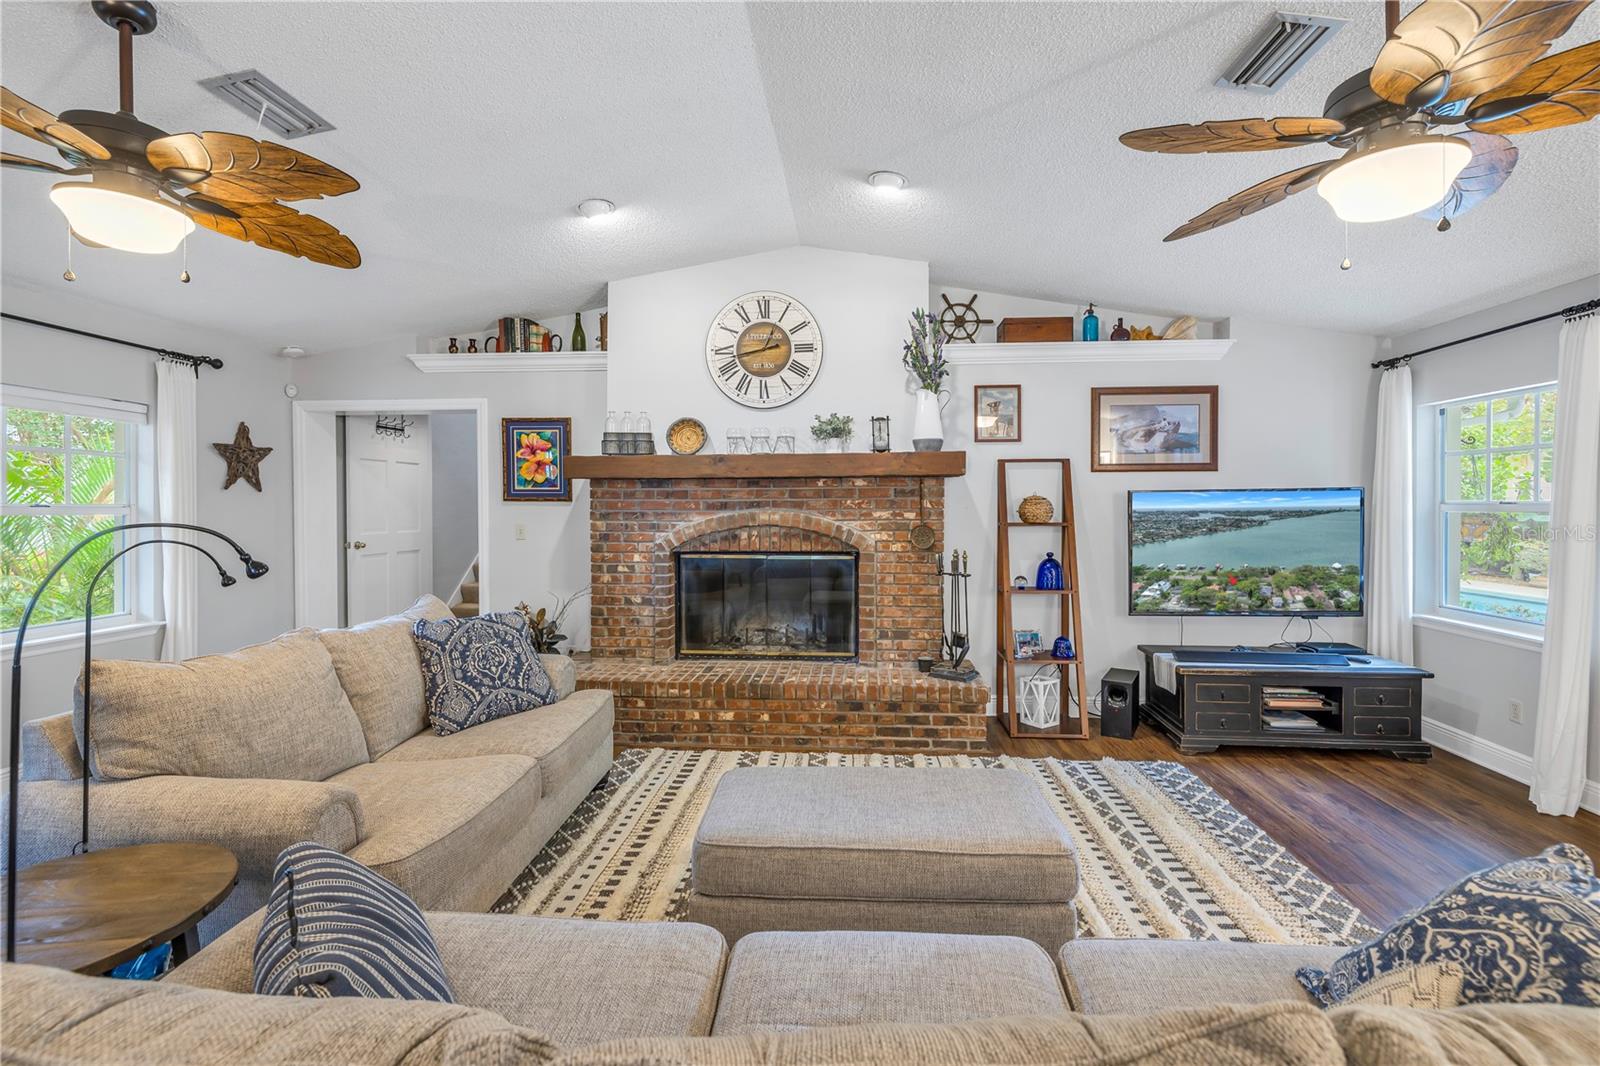 Family room with working wood burning fireplace, vaulted ceilings. You can see the waterfront and the pool from this large gathering space.